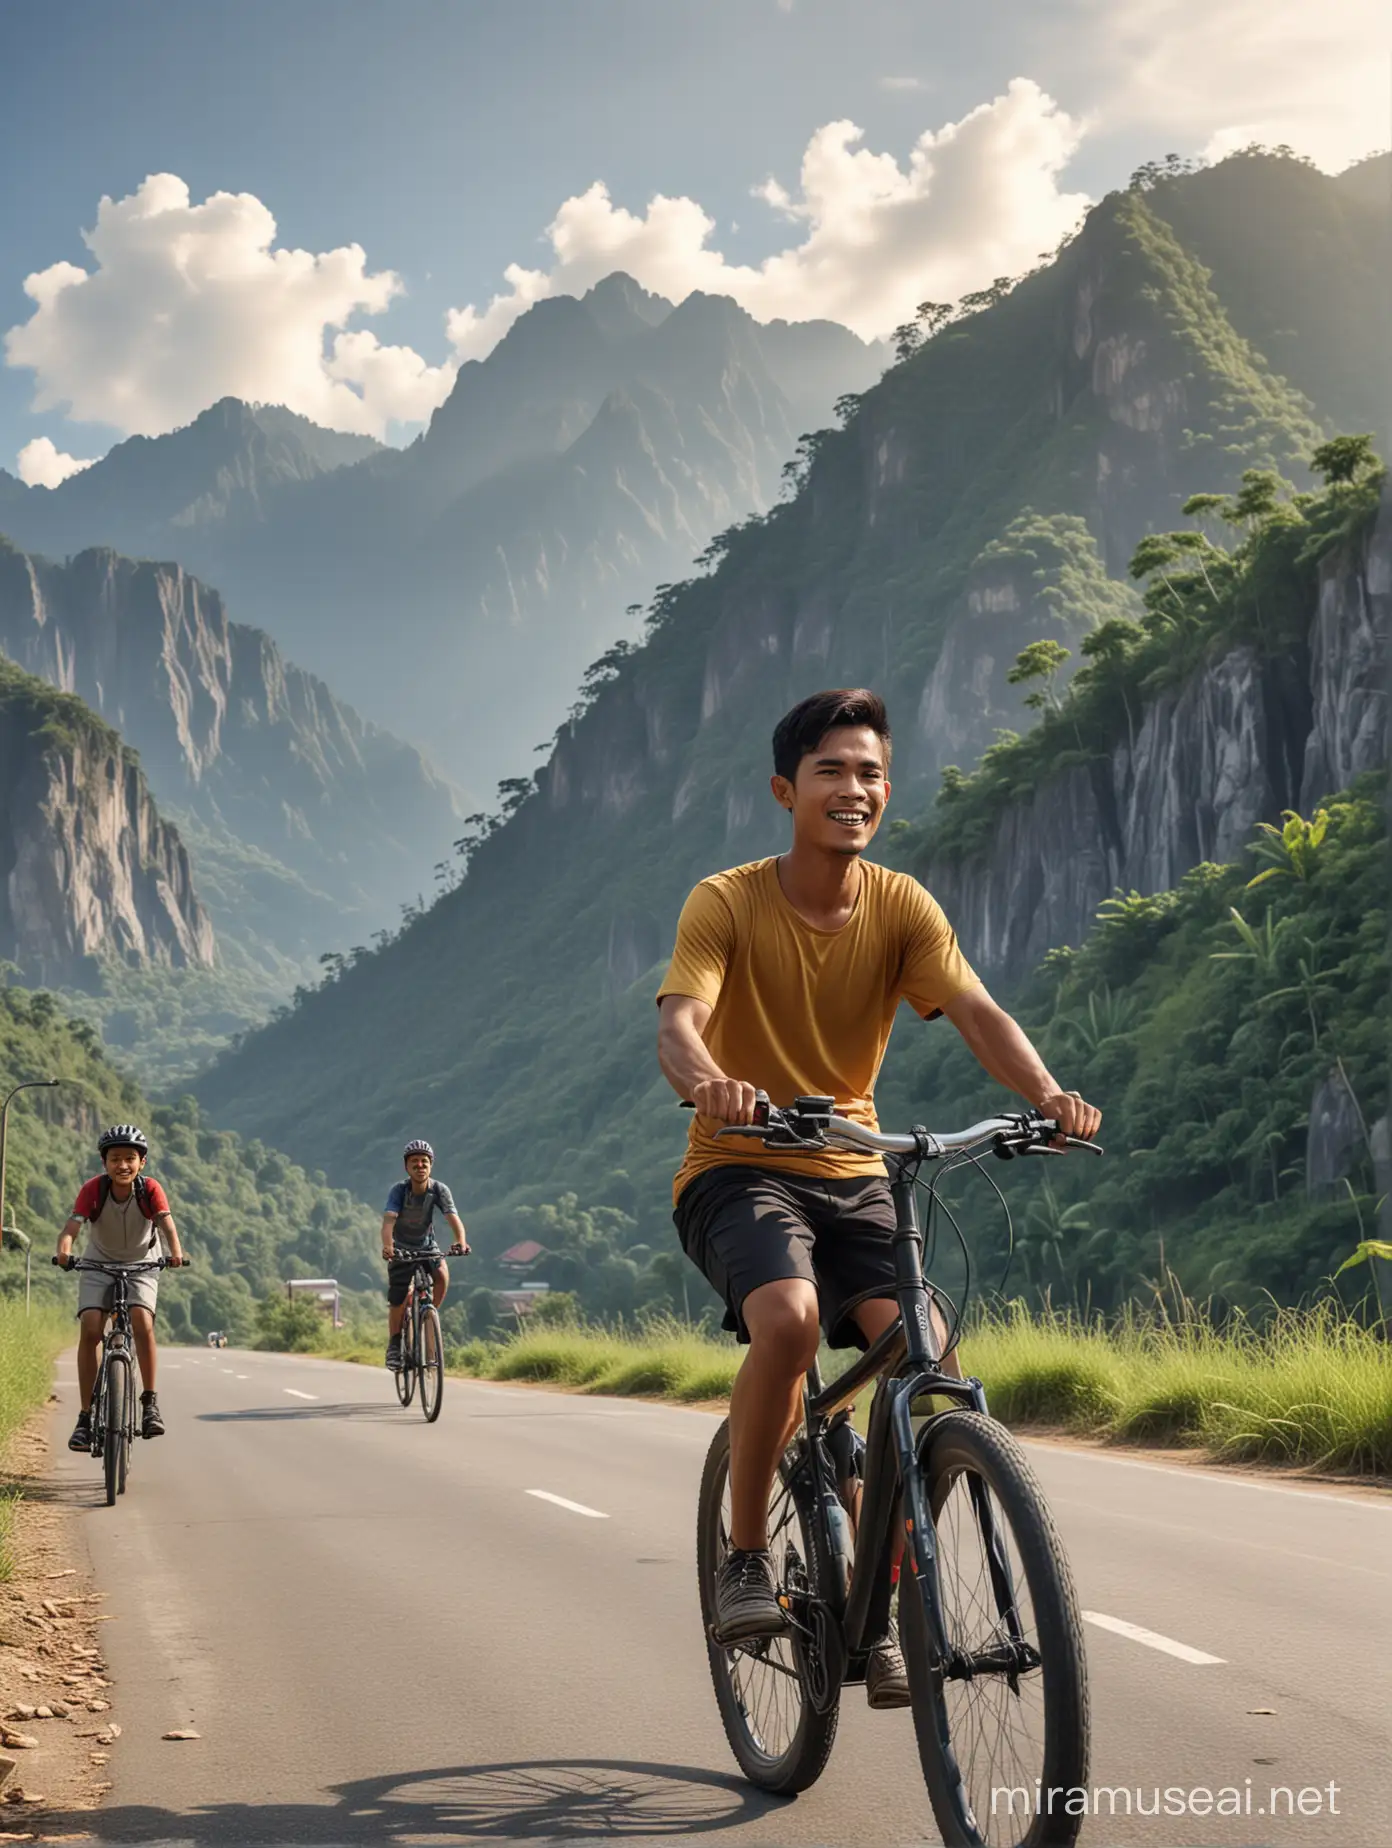 Cycling Adventure with a Young Indonesian Man and Boy in Stunning Mountain Scenery